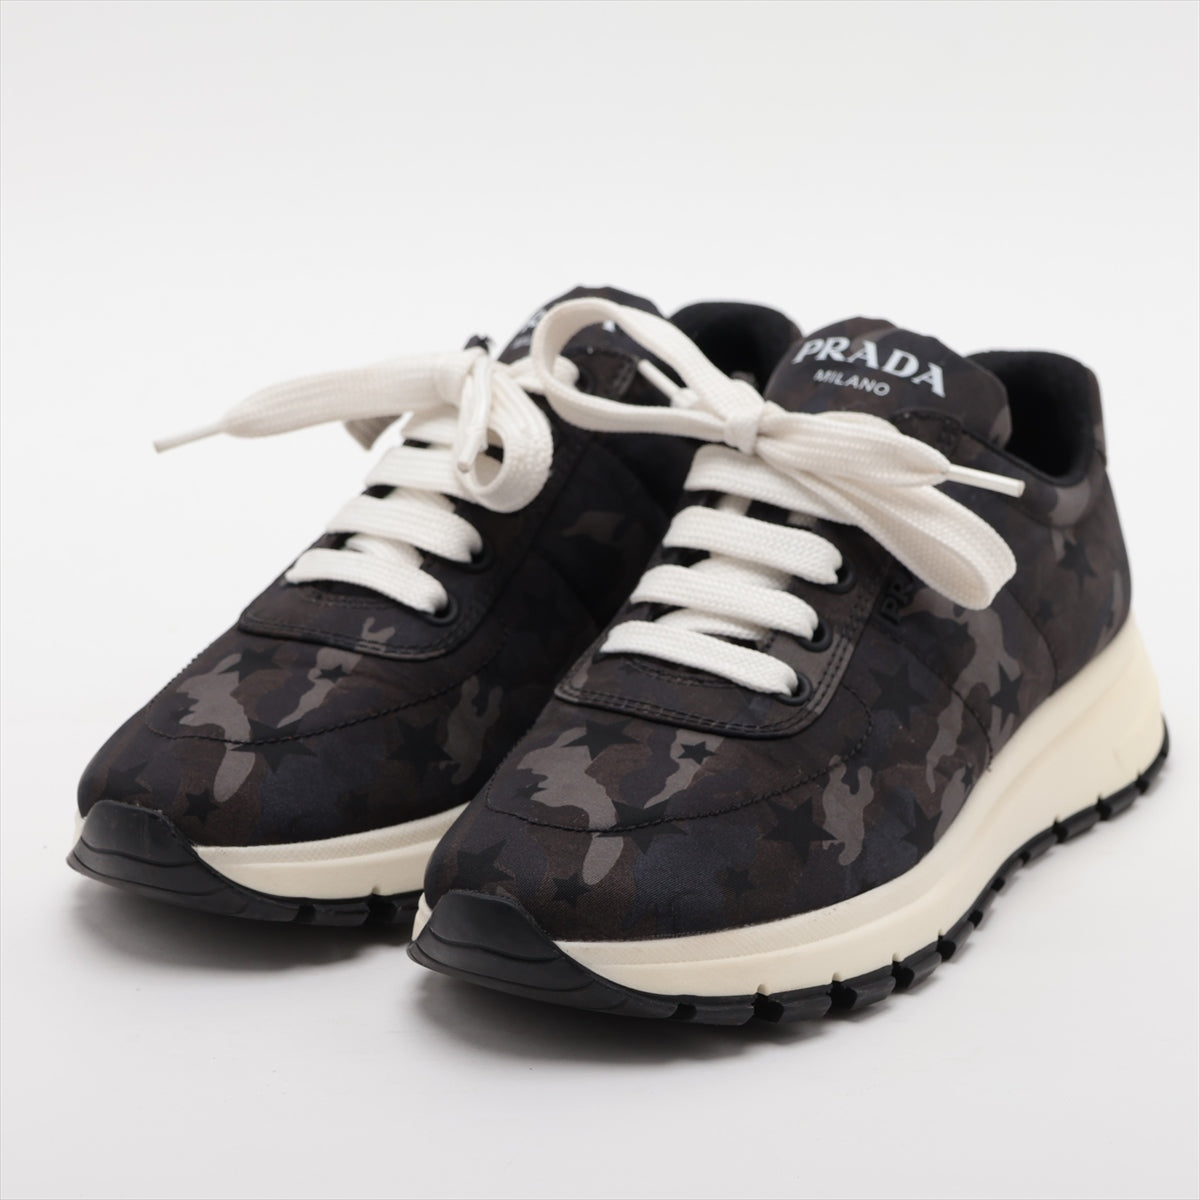 Prada Fabric Sneakers EU36 1/2 Ladies' Camouflage Star There is a bag